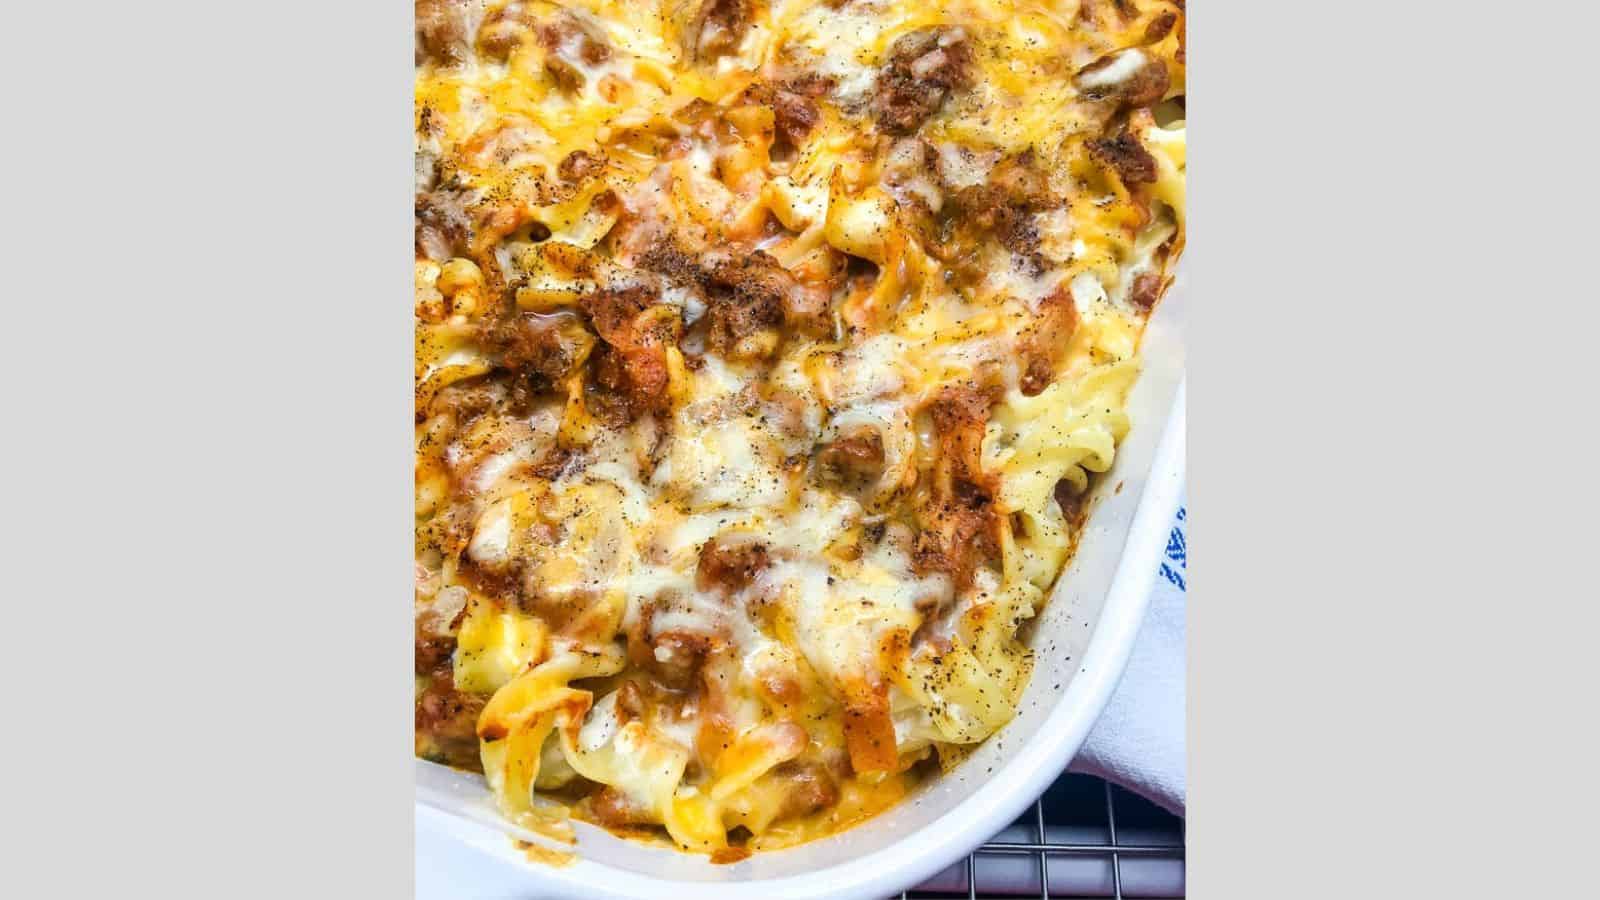 Noodles and ground beef are mixed with a cheesy topping together in a creamy casserole.